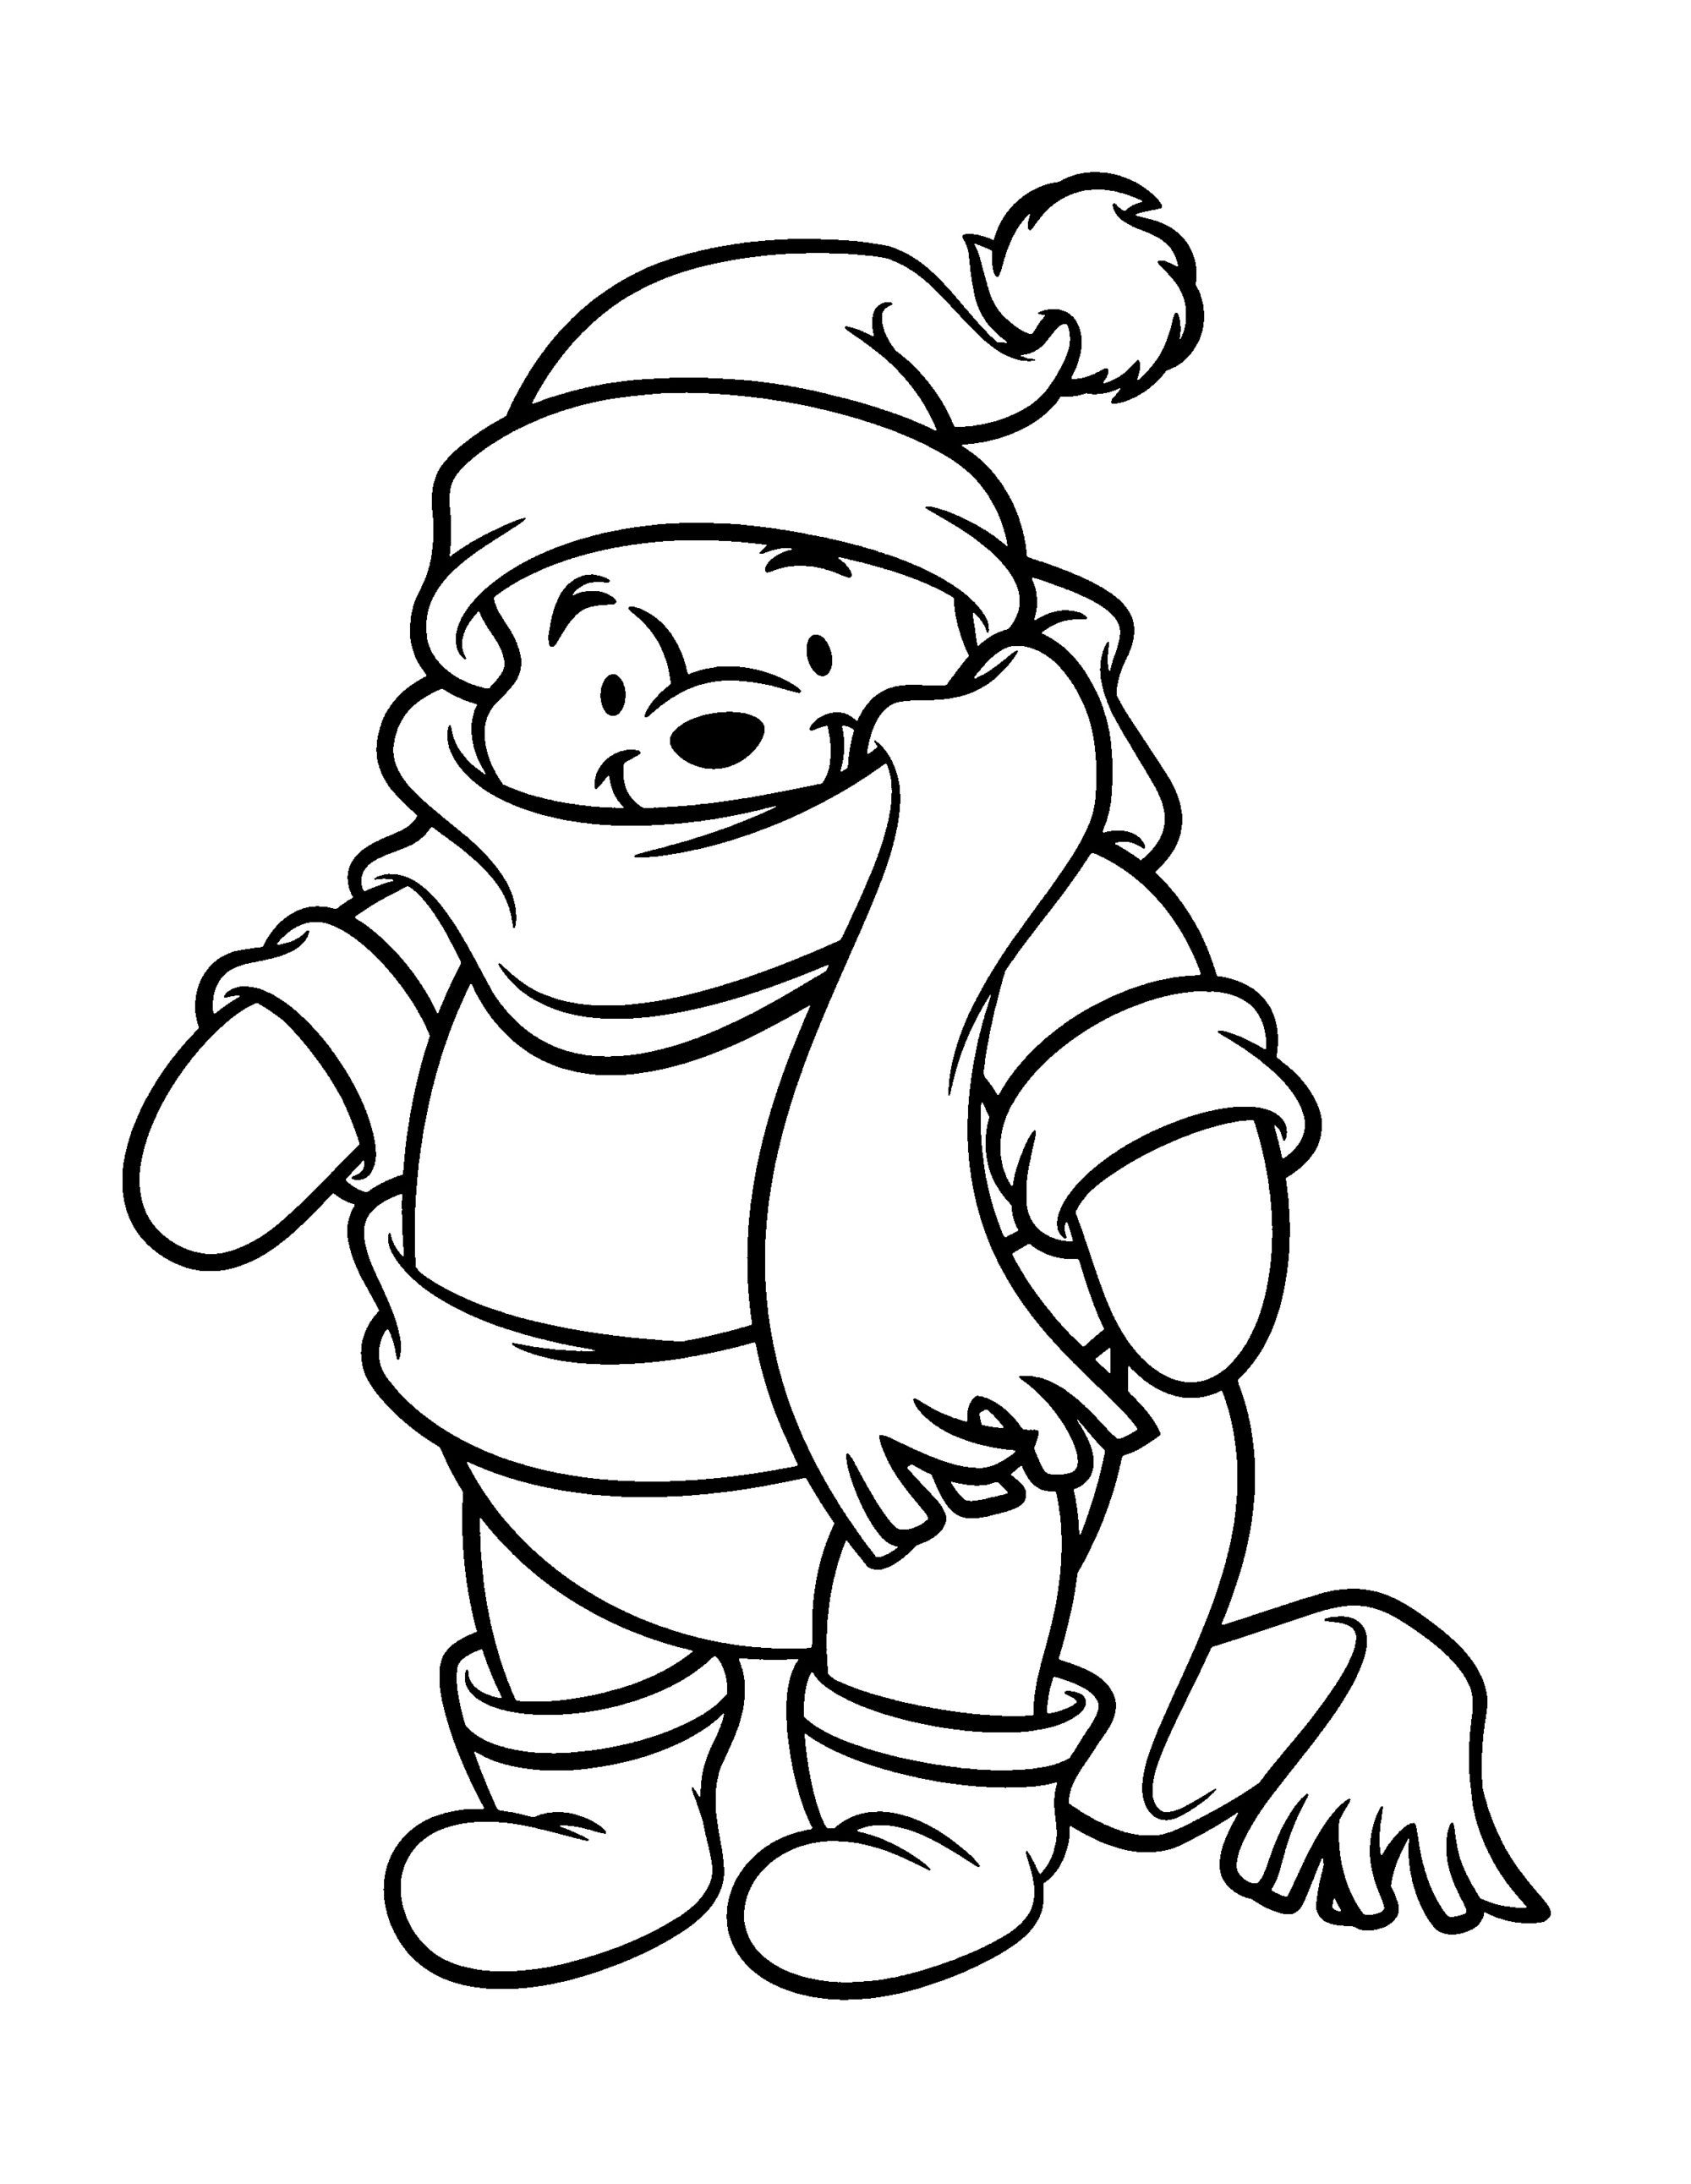 winnie-the-pooh-coloring-pages-winter